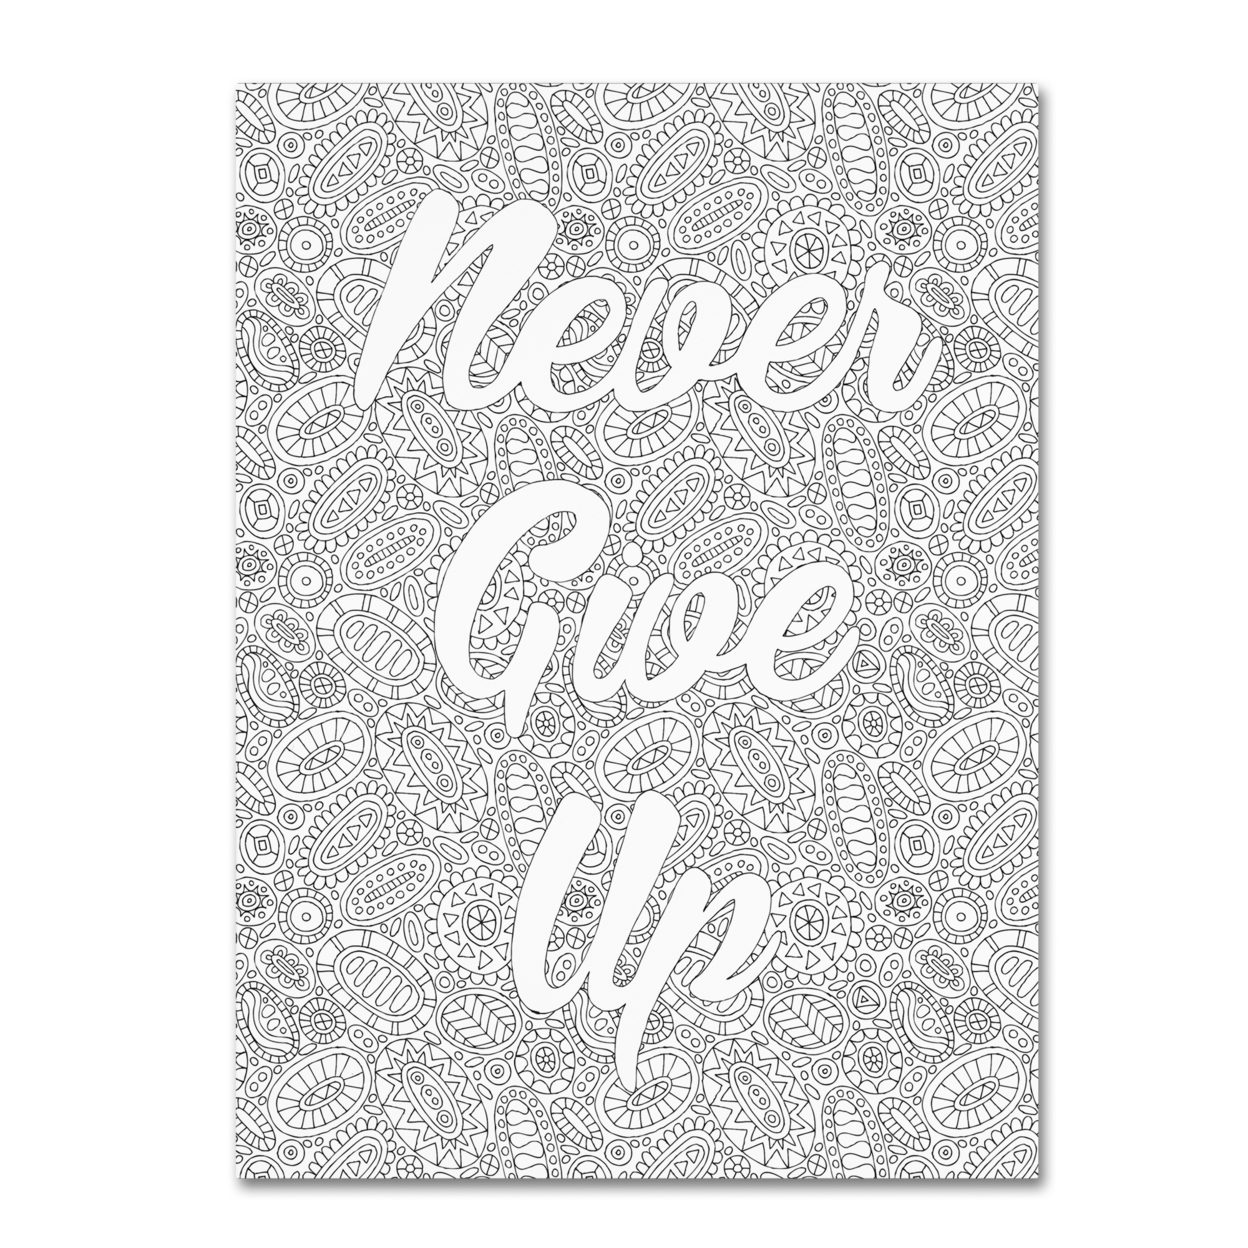 Hello Angel 'Inspirational Quotes 17' Canvas Art 18 X 24